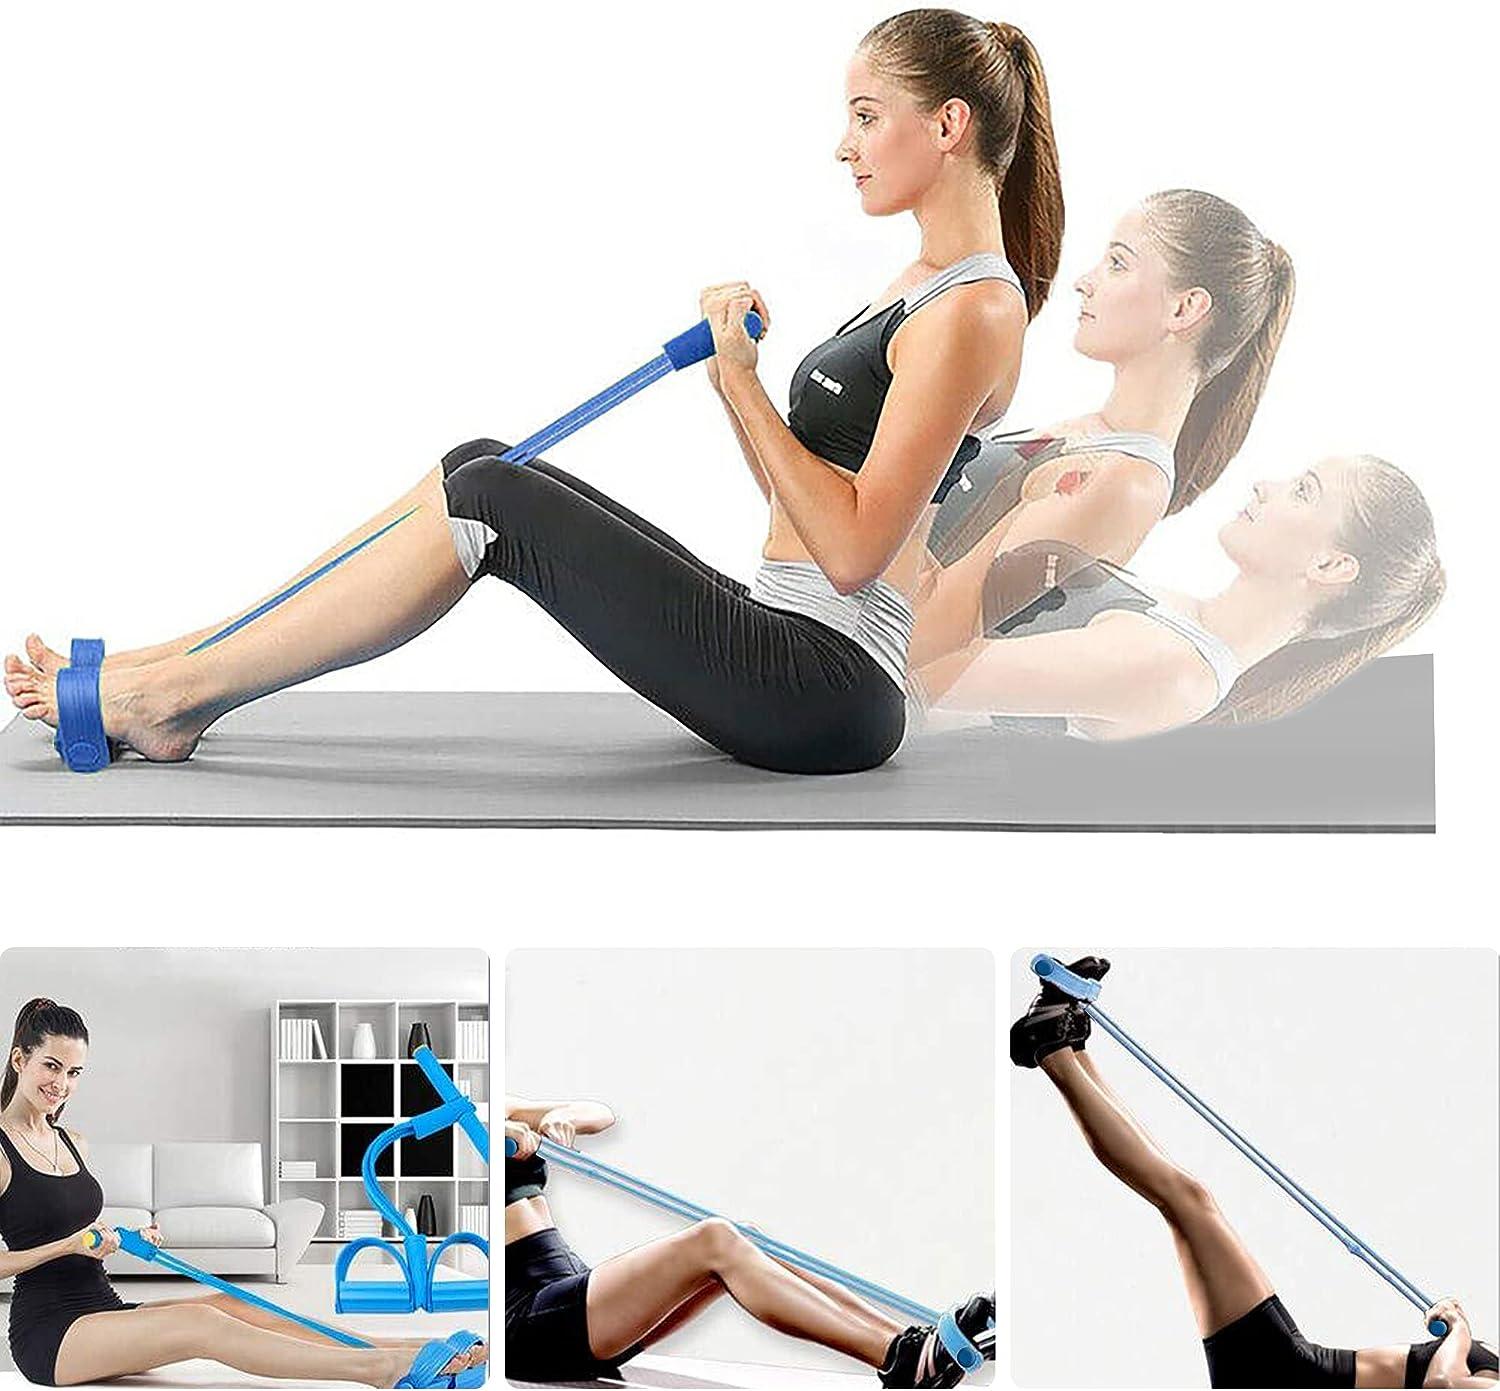 YOGA KIT for BEGINNERS Yoga Mat, Strap, Block Stock Photo - Image of  athletic, accessories: 148900260